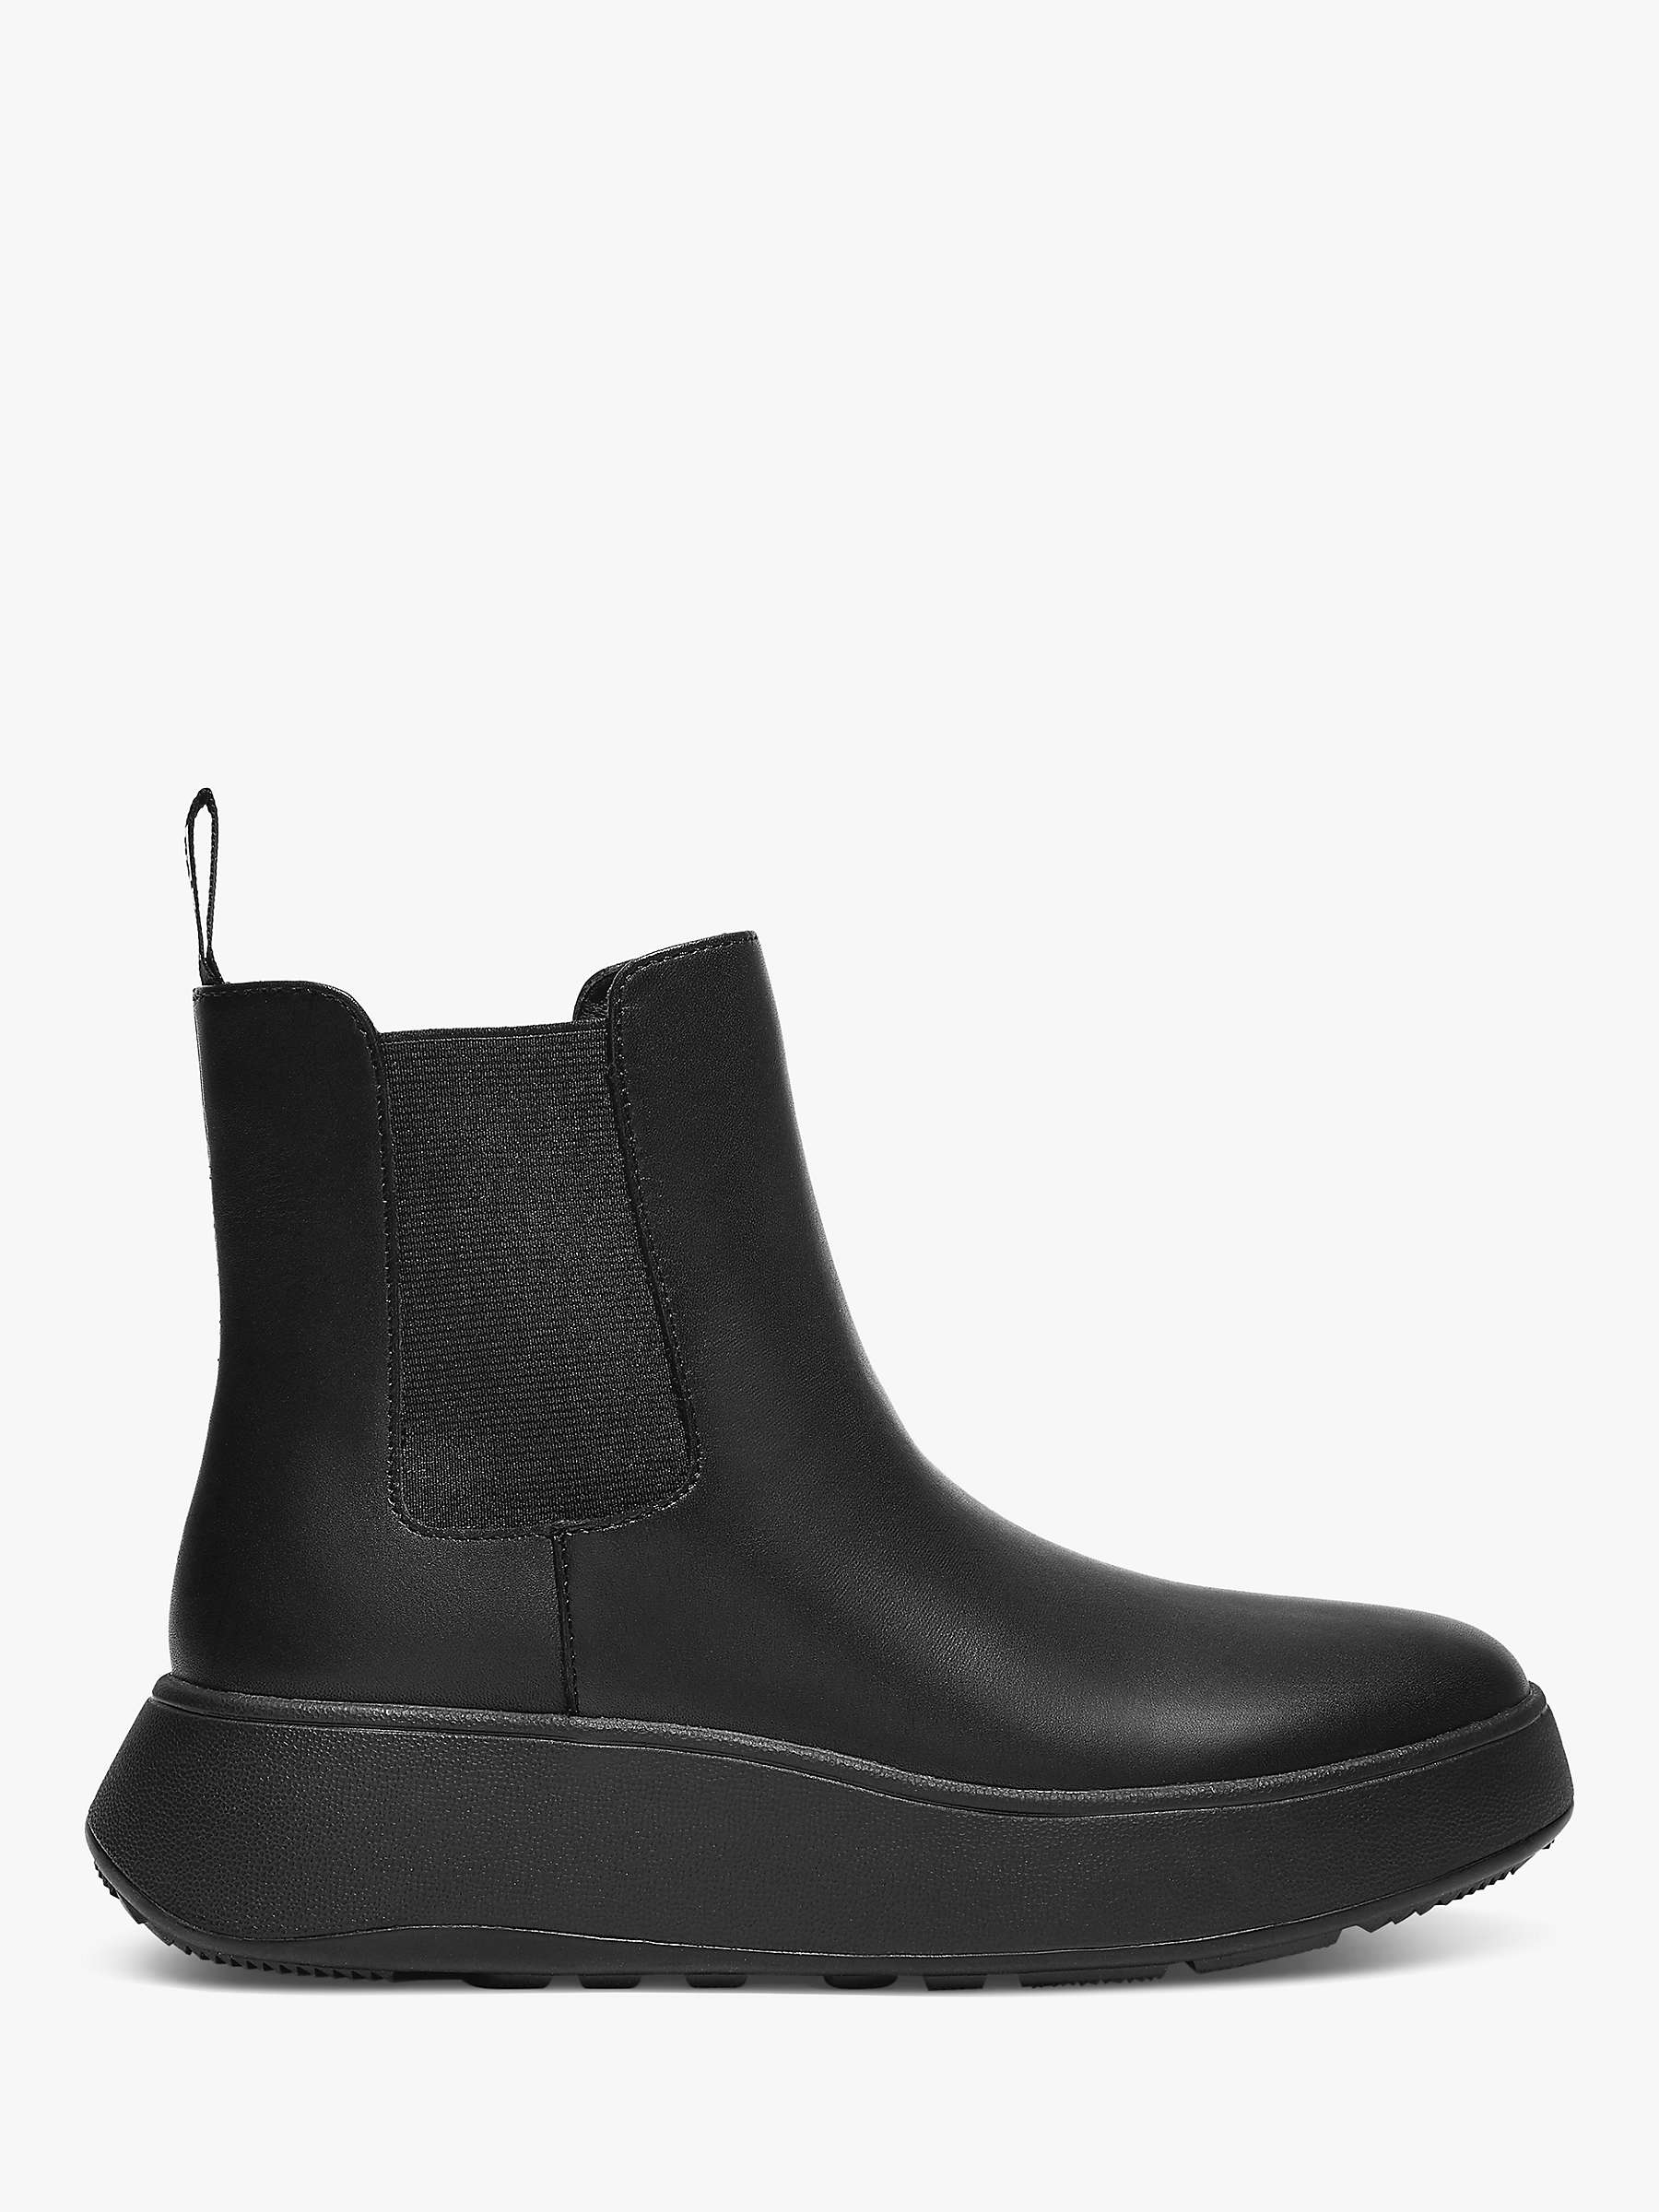 Buy FitFlop Flatform Leather Ankle Boots Online at johnlewis.com